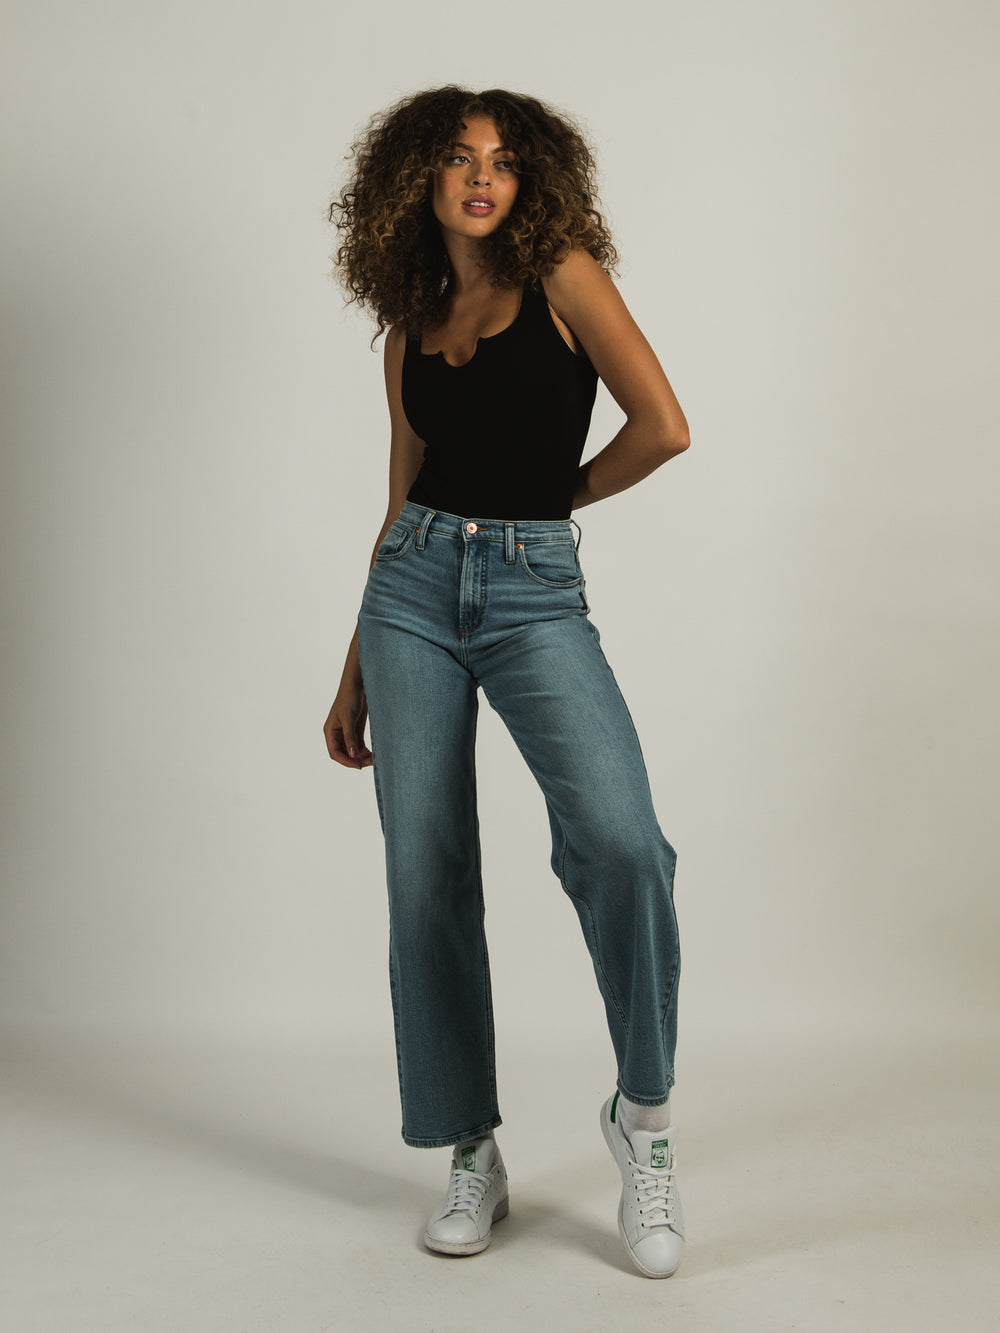 Buy Highly Desirable High Rise Straight Leg Jeans for CAD 98.00